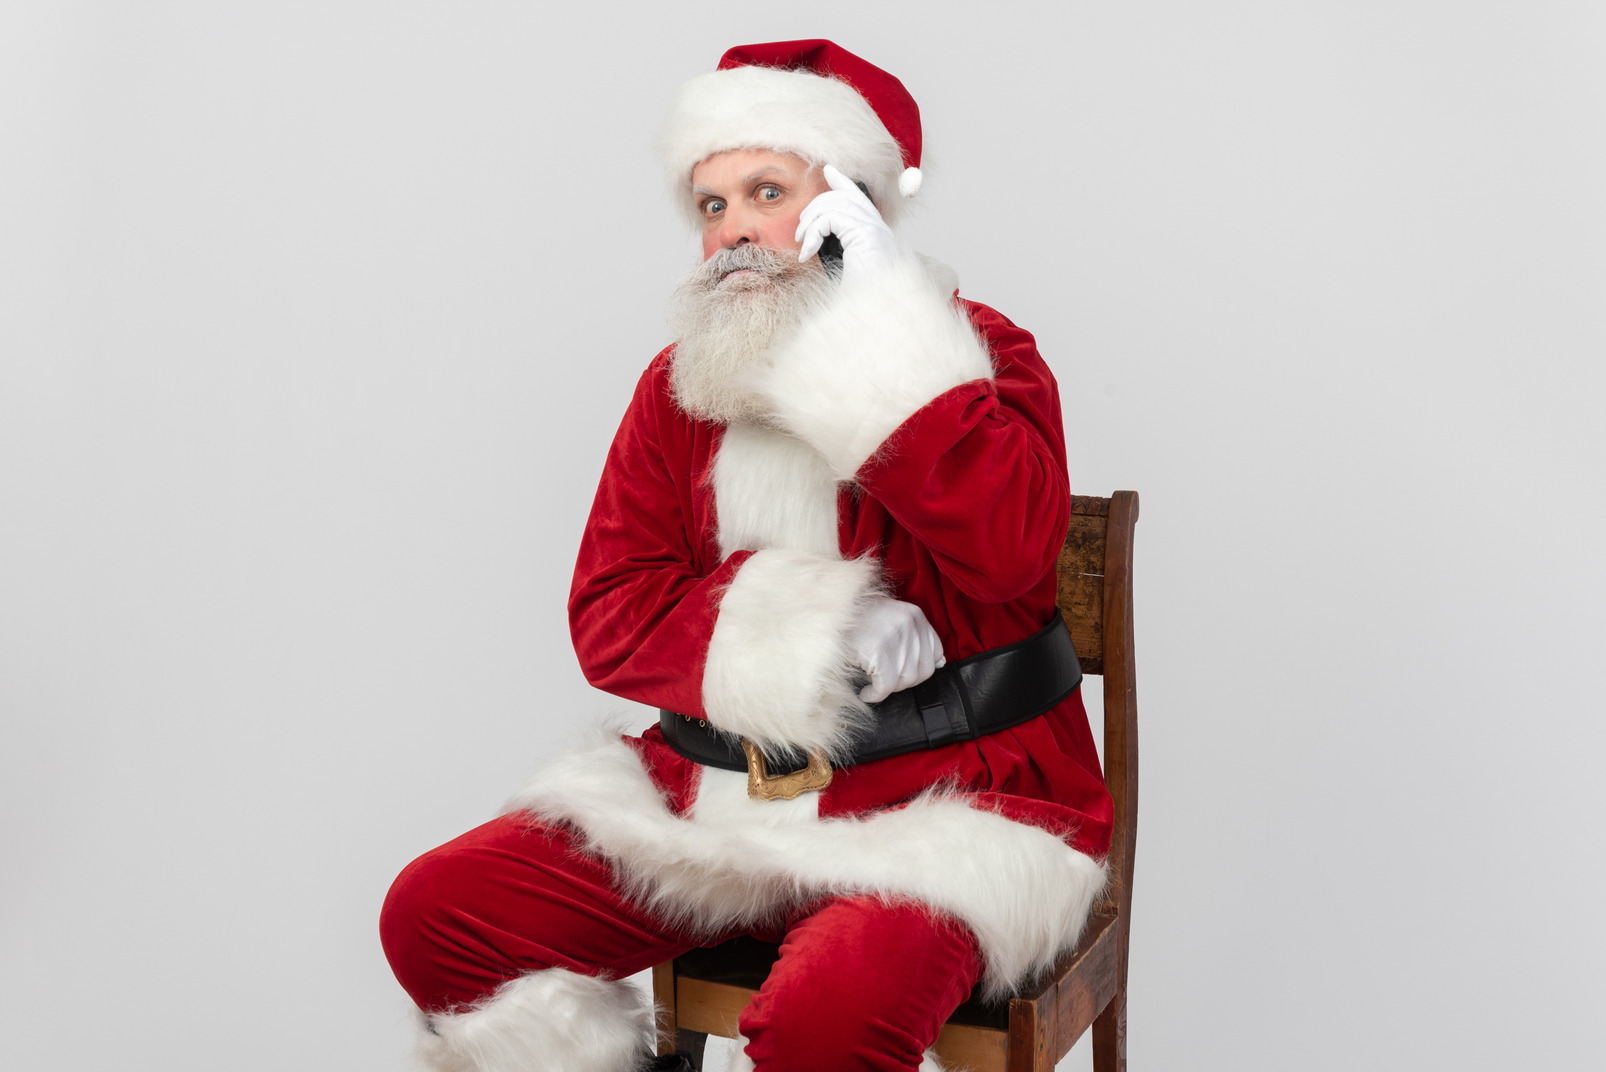 Pensive santa claus sittting and talking on the phone